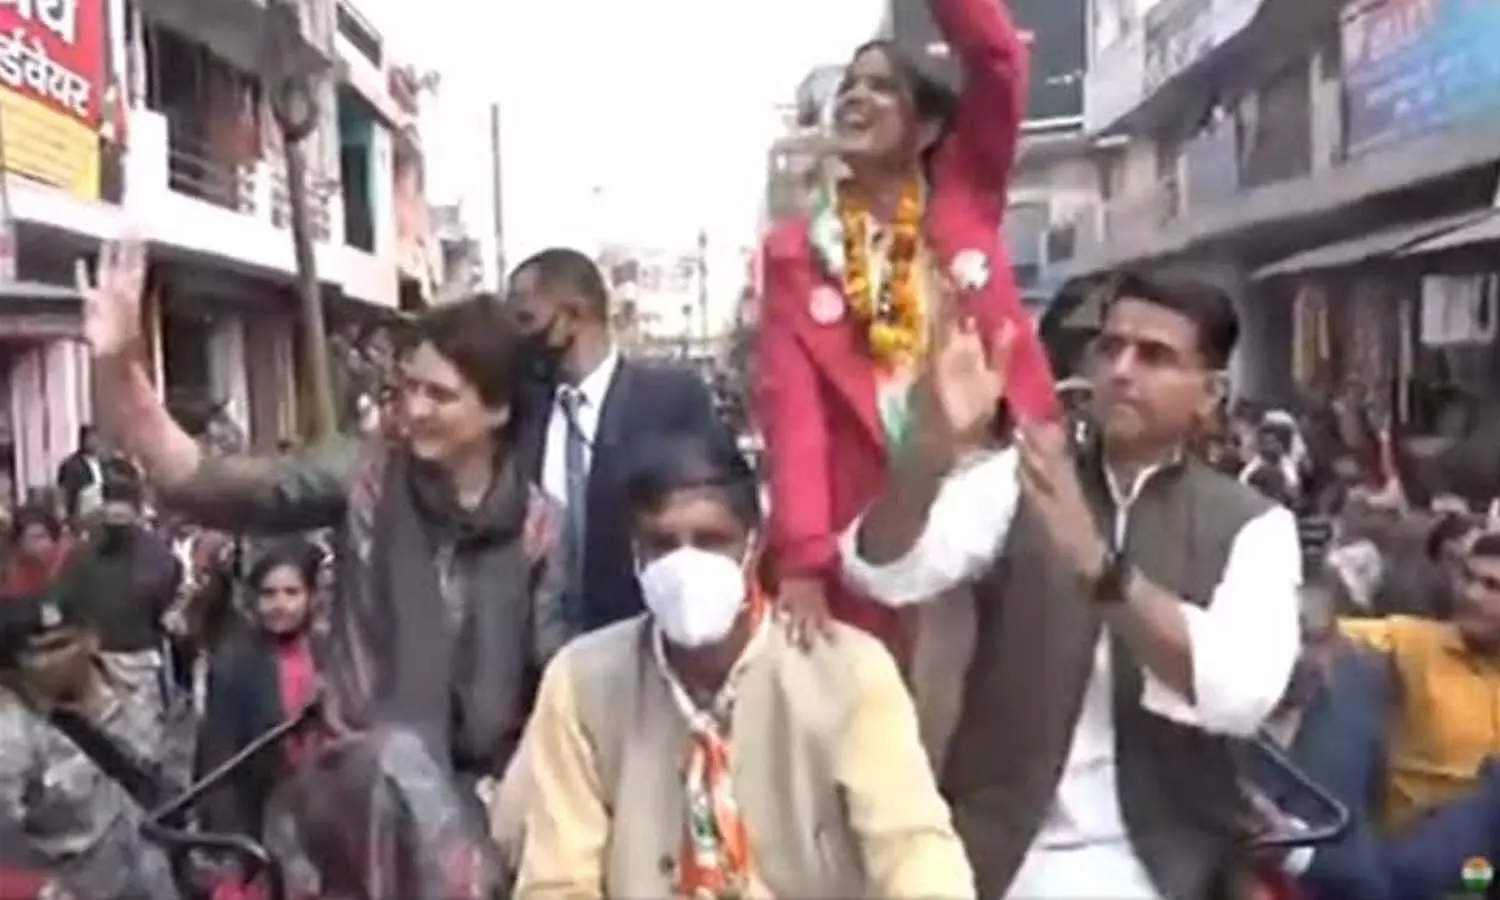 UP Election 2022: Priyanka Gandhi reaches Meerut with Sachin Pilot, appeals to voters to bring change